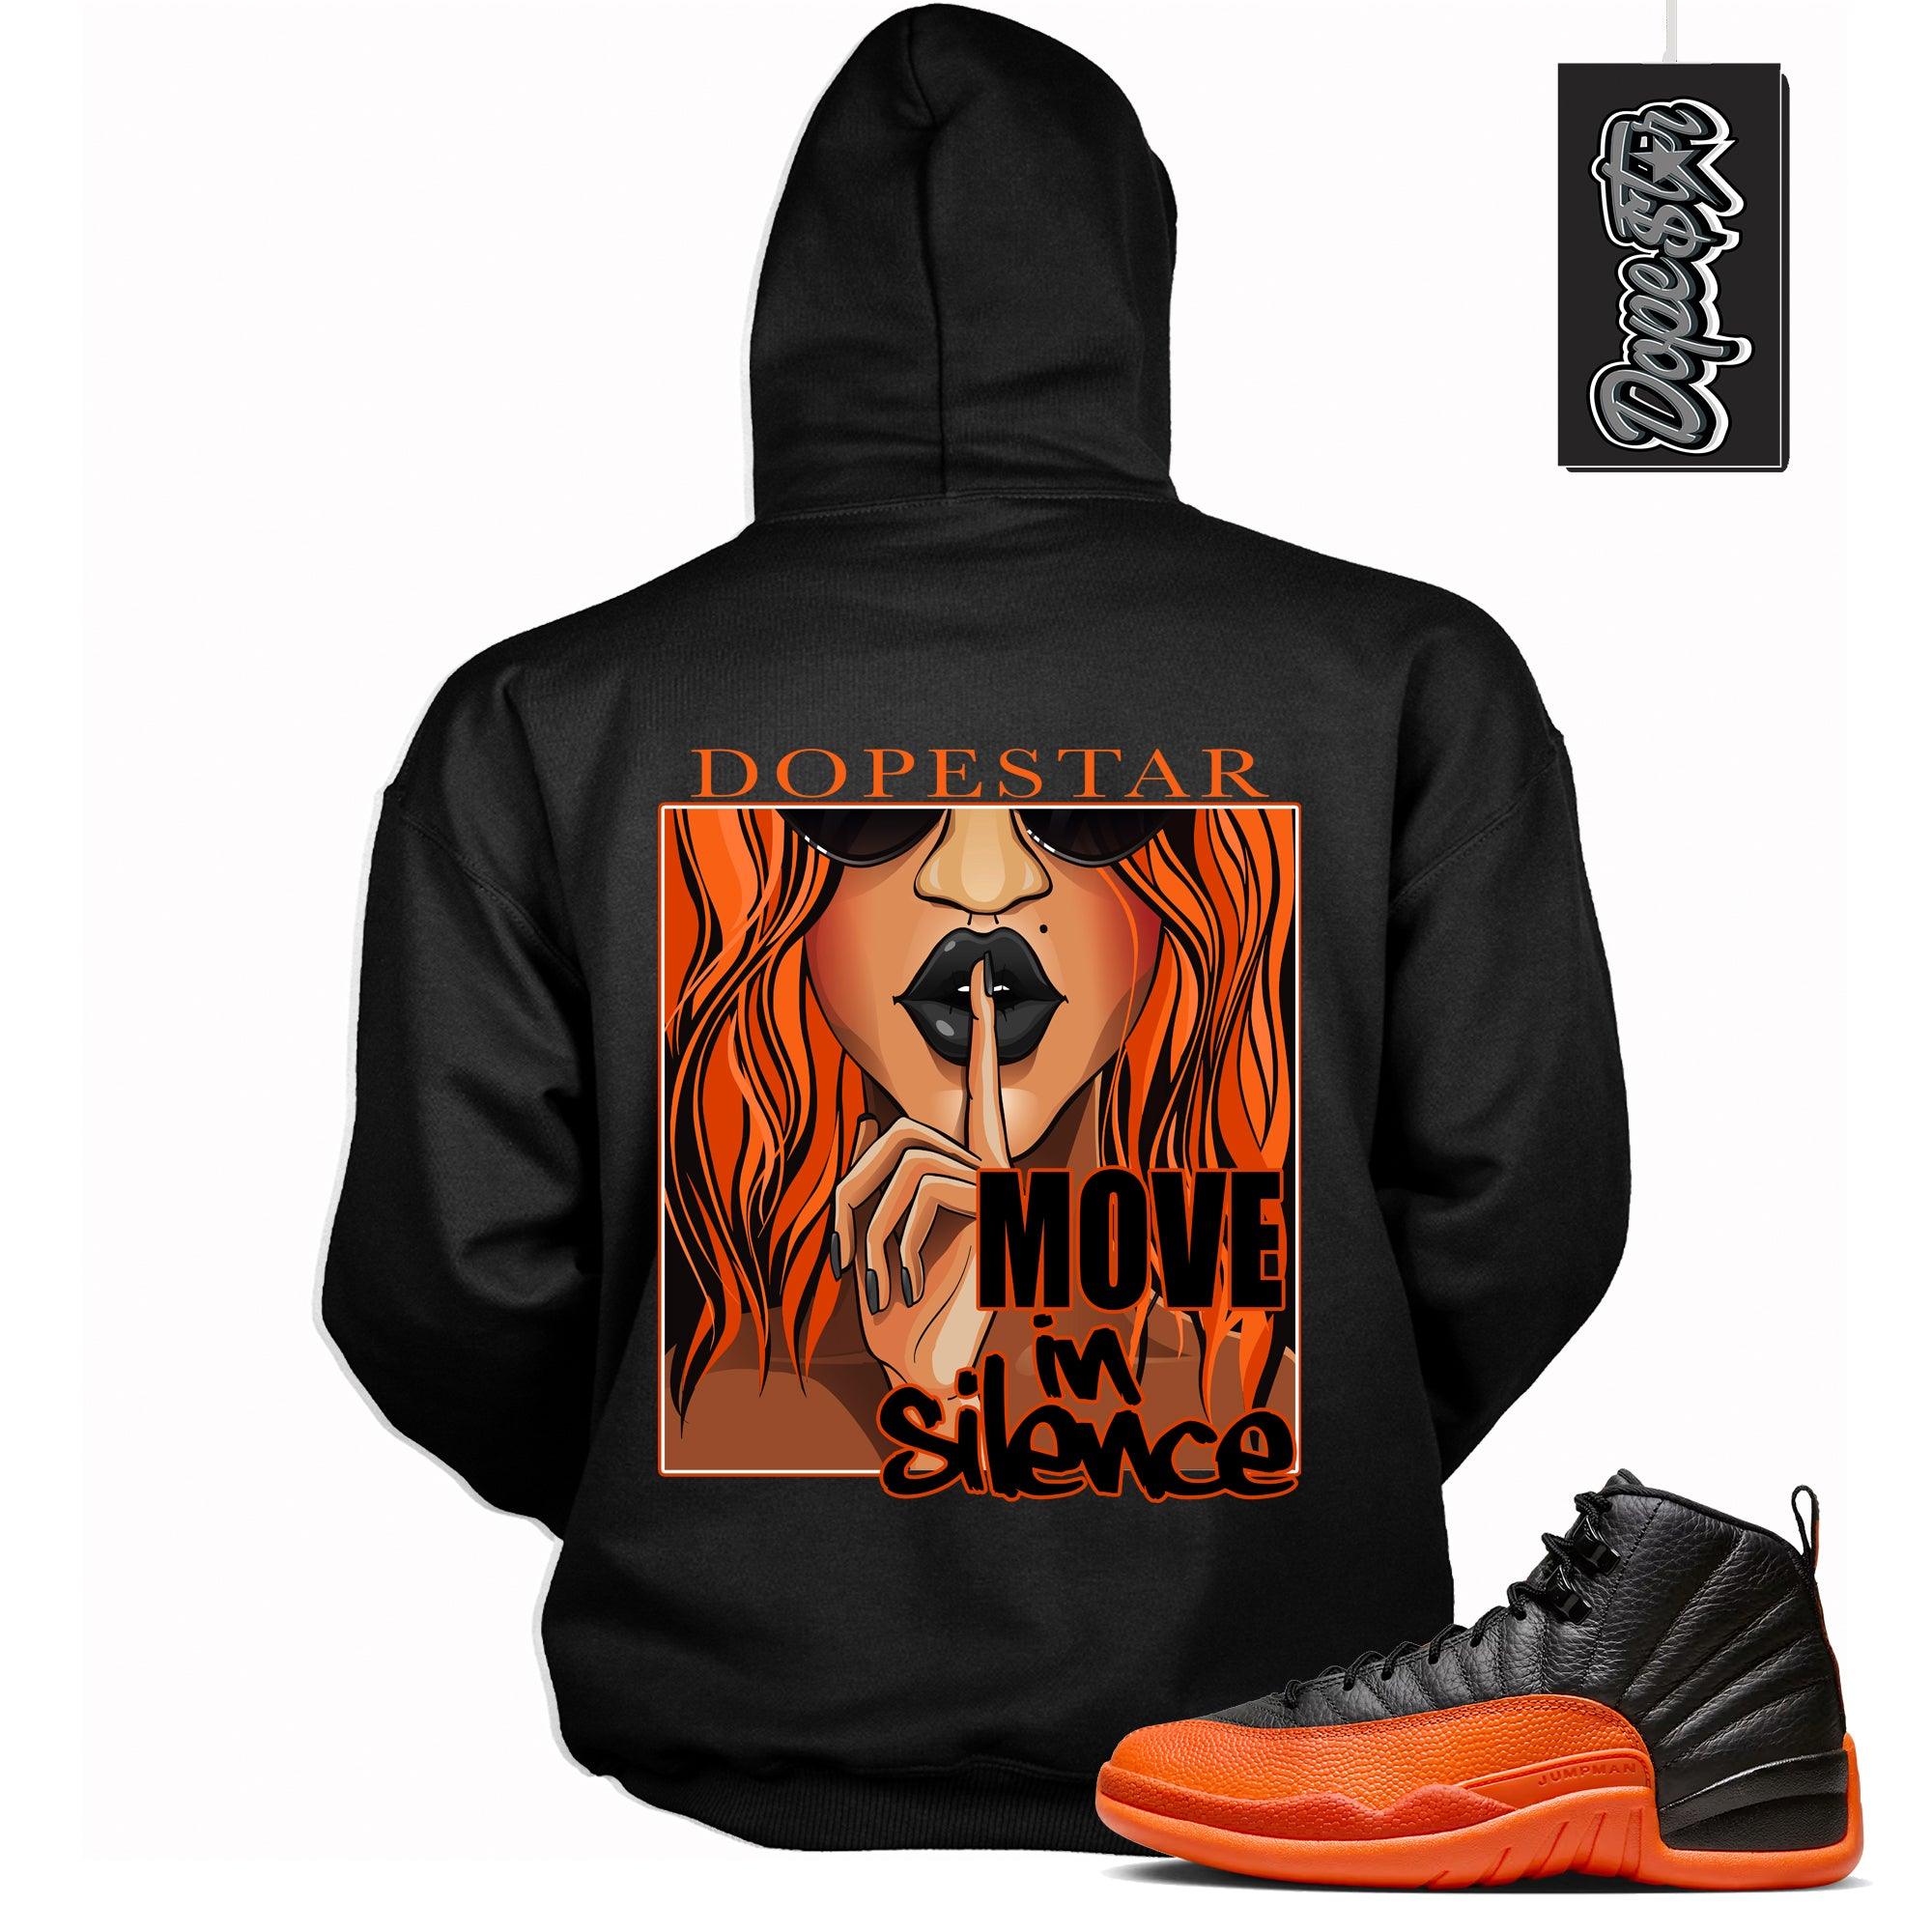 Cool Black Graphic Hoodie with “ Move In Silence “ print, that perfectly matches Air Jordan 12 Retro WNBA All-Star Brilliant Orange  sneakers